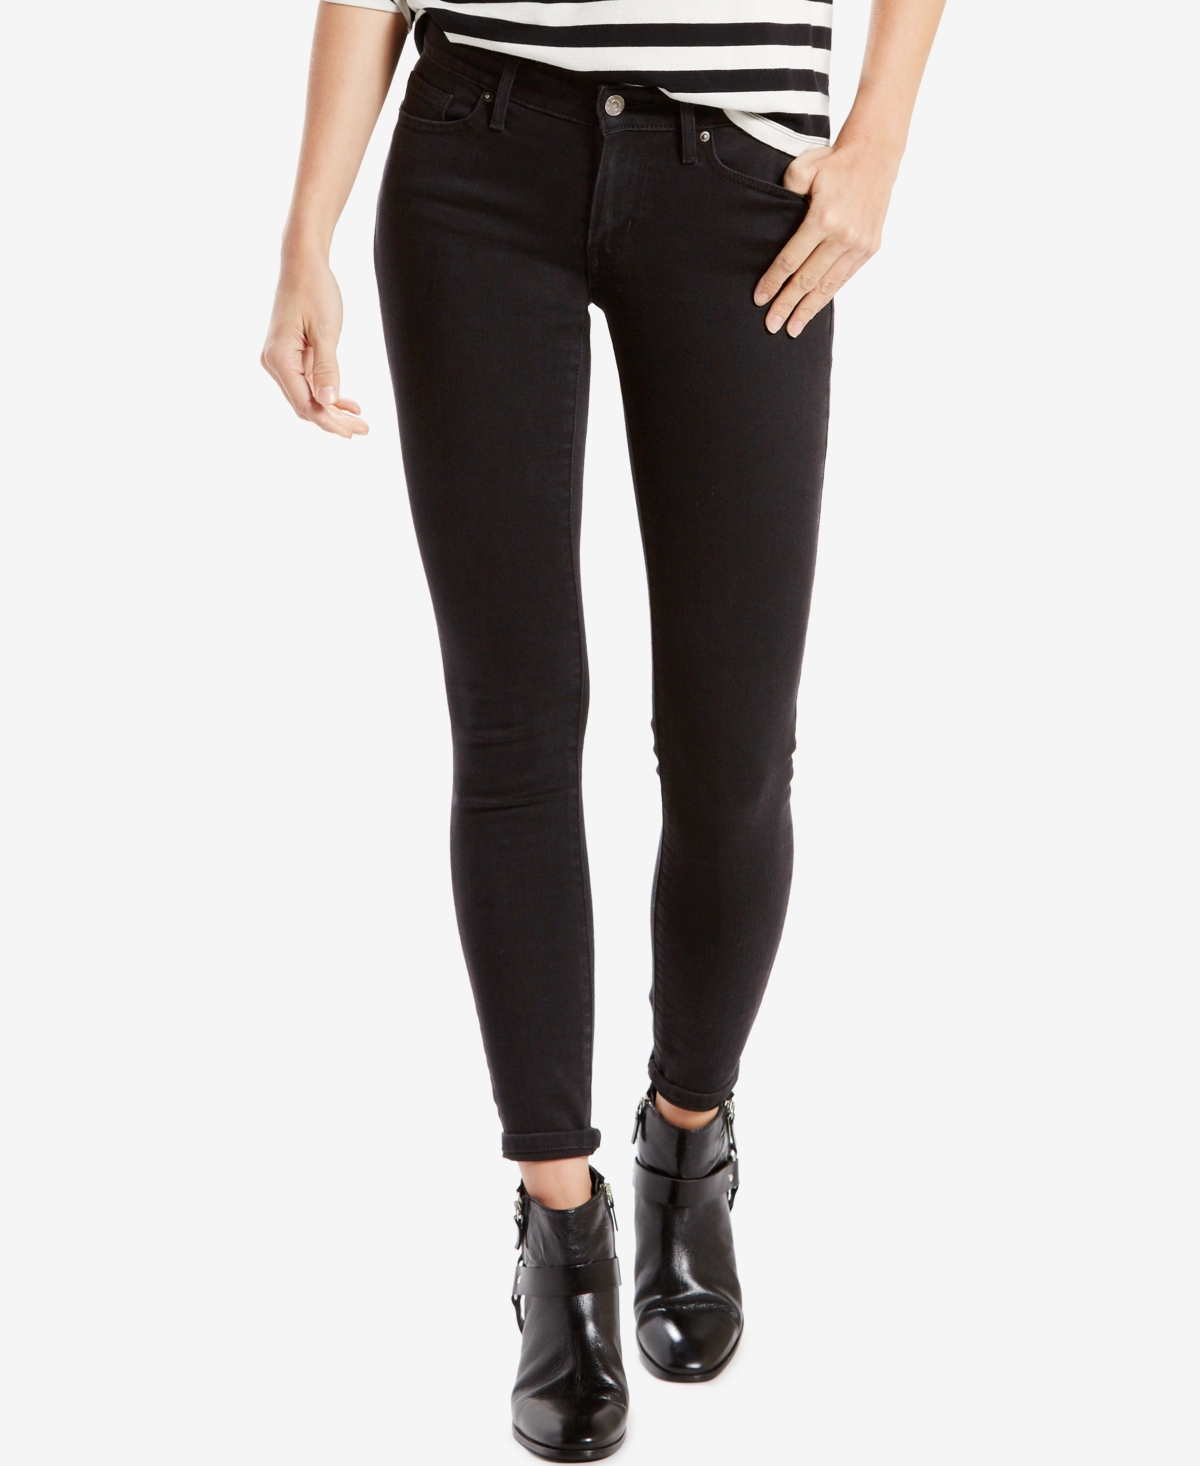 Women's 711 Stretchy Skinny Jeans in Long Length - Soft Black